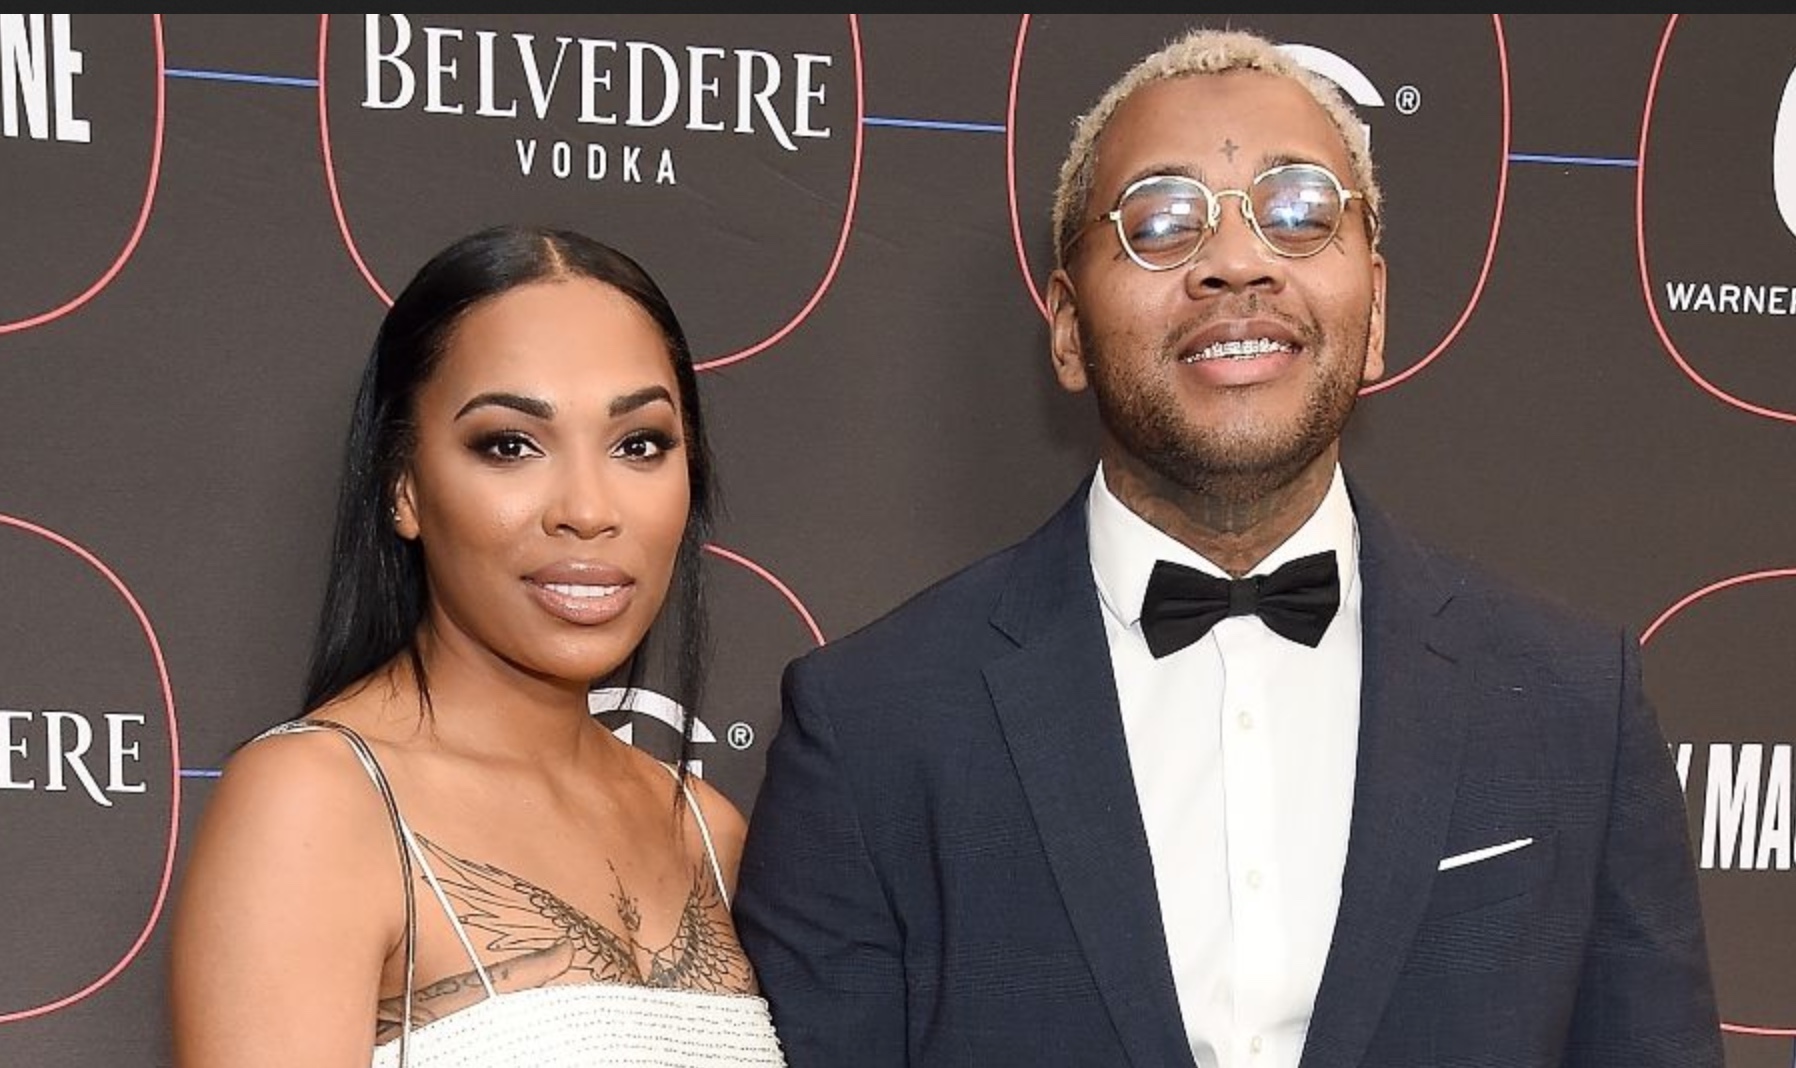 Who is Dreka Gates (Kevin Gates Wife)? Relationship History! The world of Technology